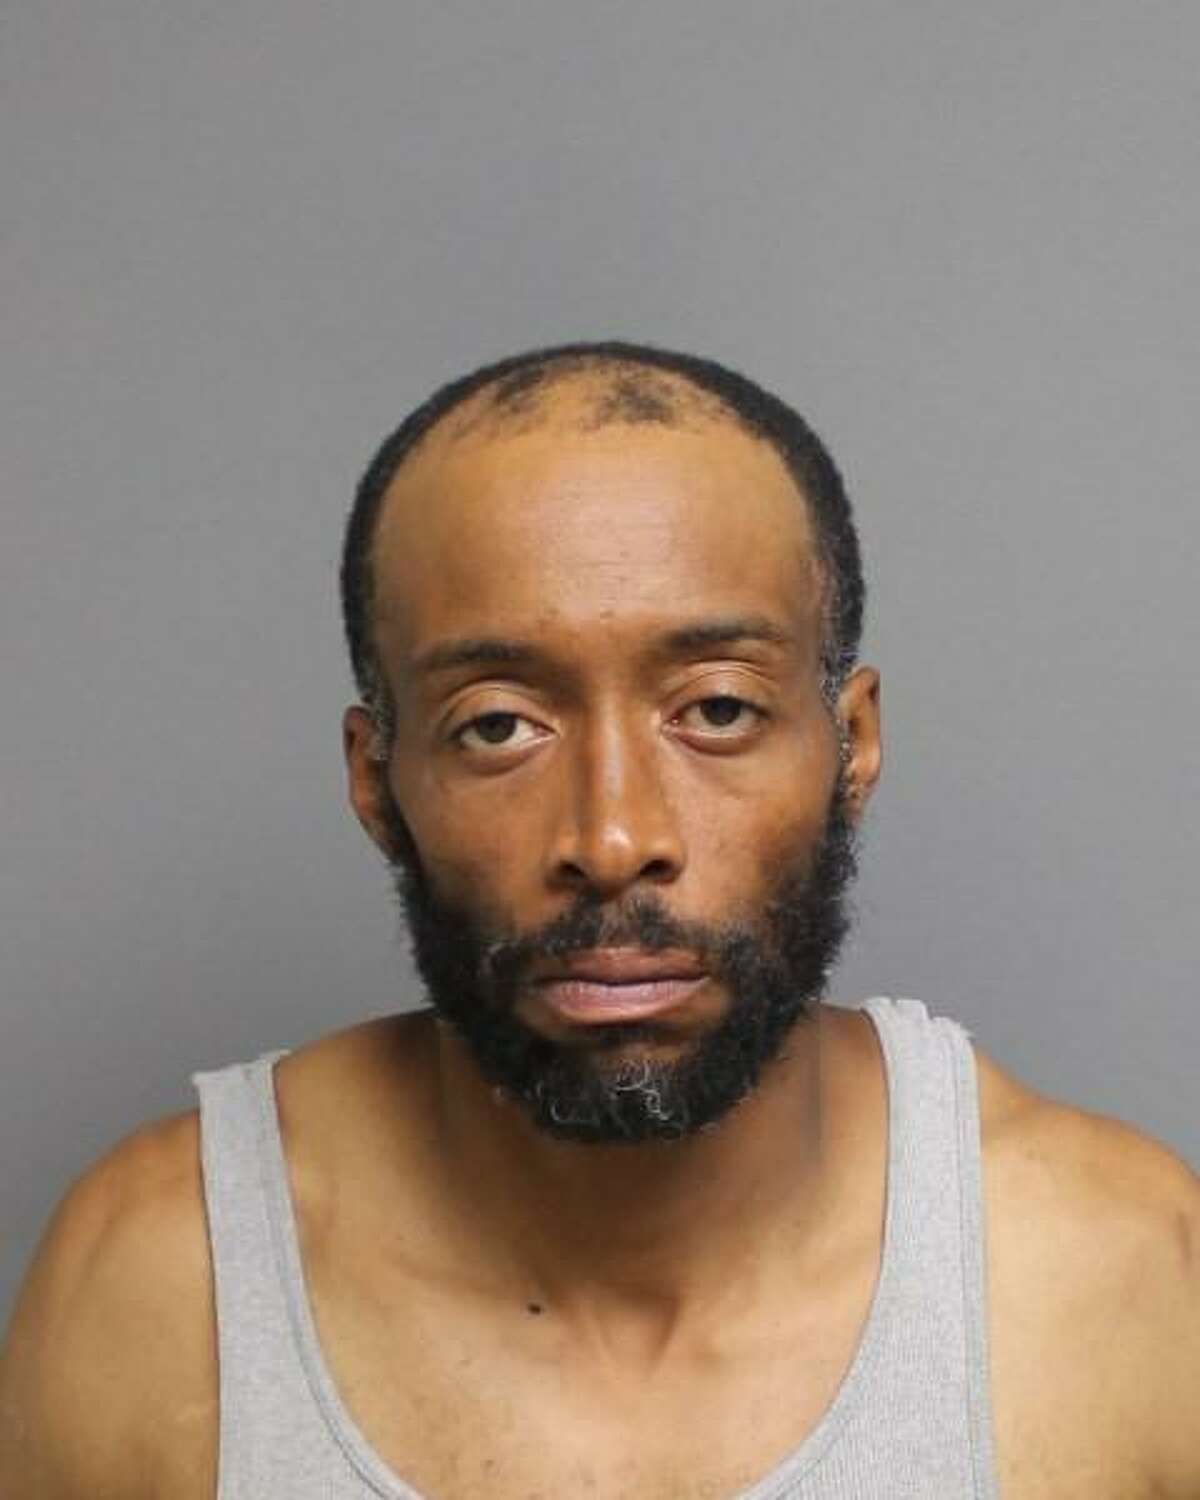 Police in Bridgeport, Conn. arrested 44-year-old Danarius Dukes, of Stamford, in July 2020 for his alleged involvement in the 1993 killing of Theodore 'Teddy' Edwards.